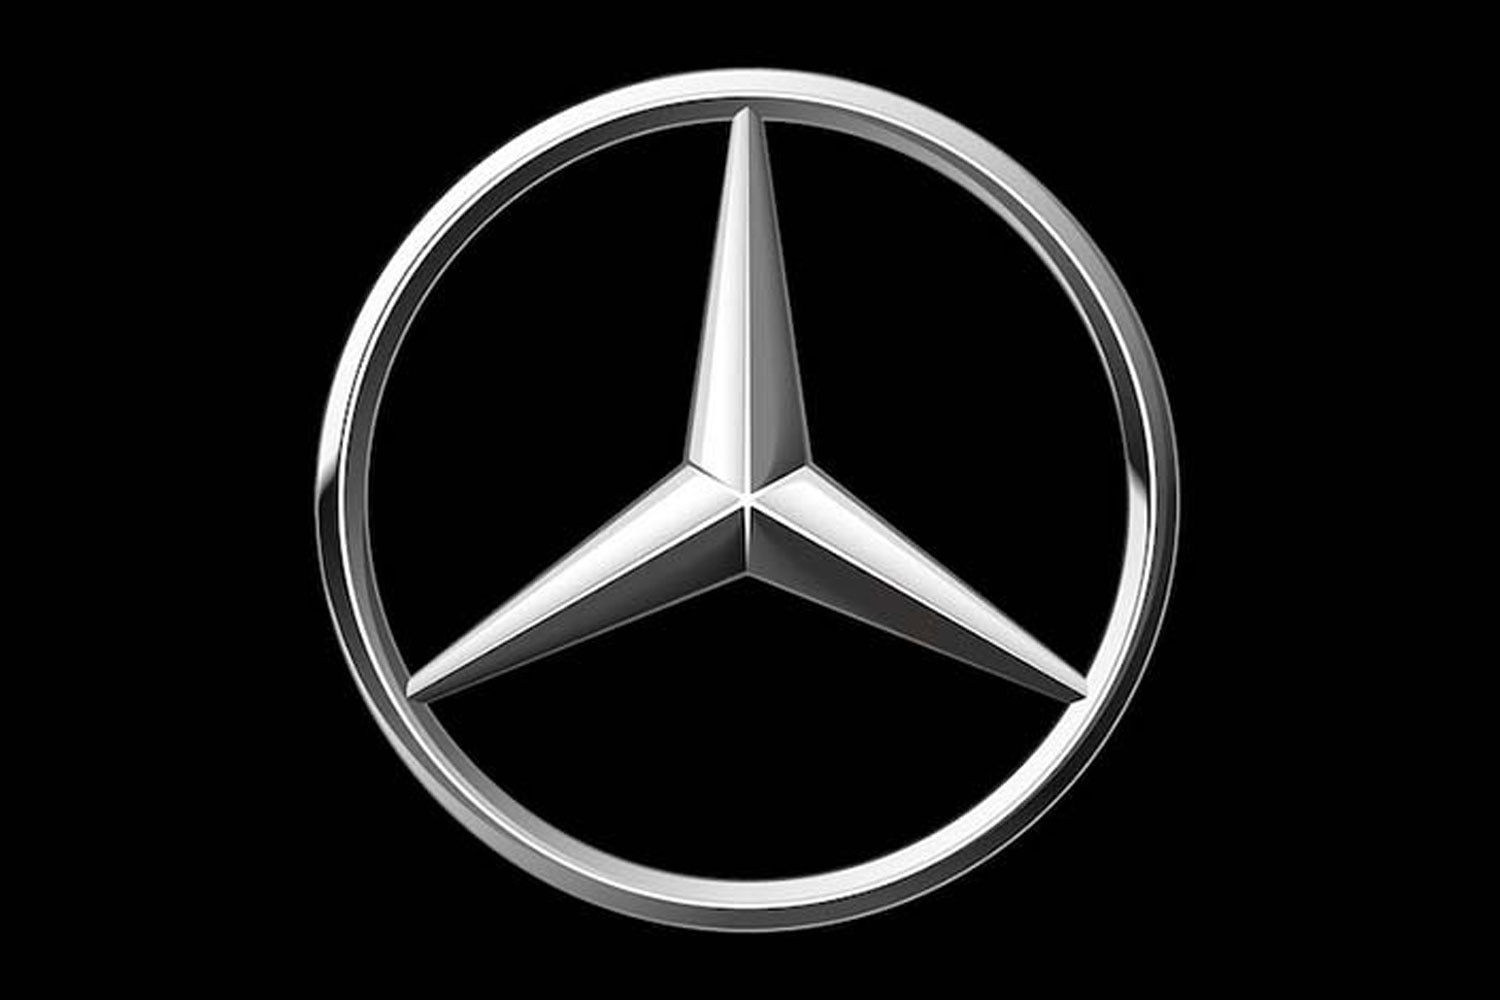 Car Logos Explained: What These 9 Symbols Really Mean